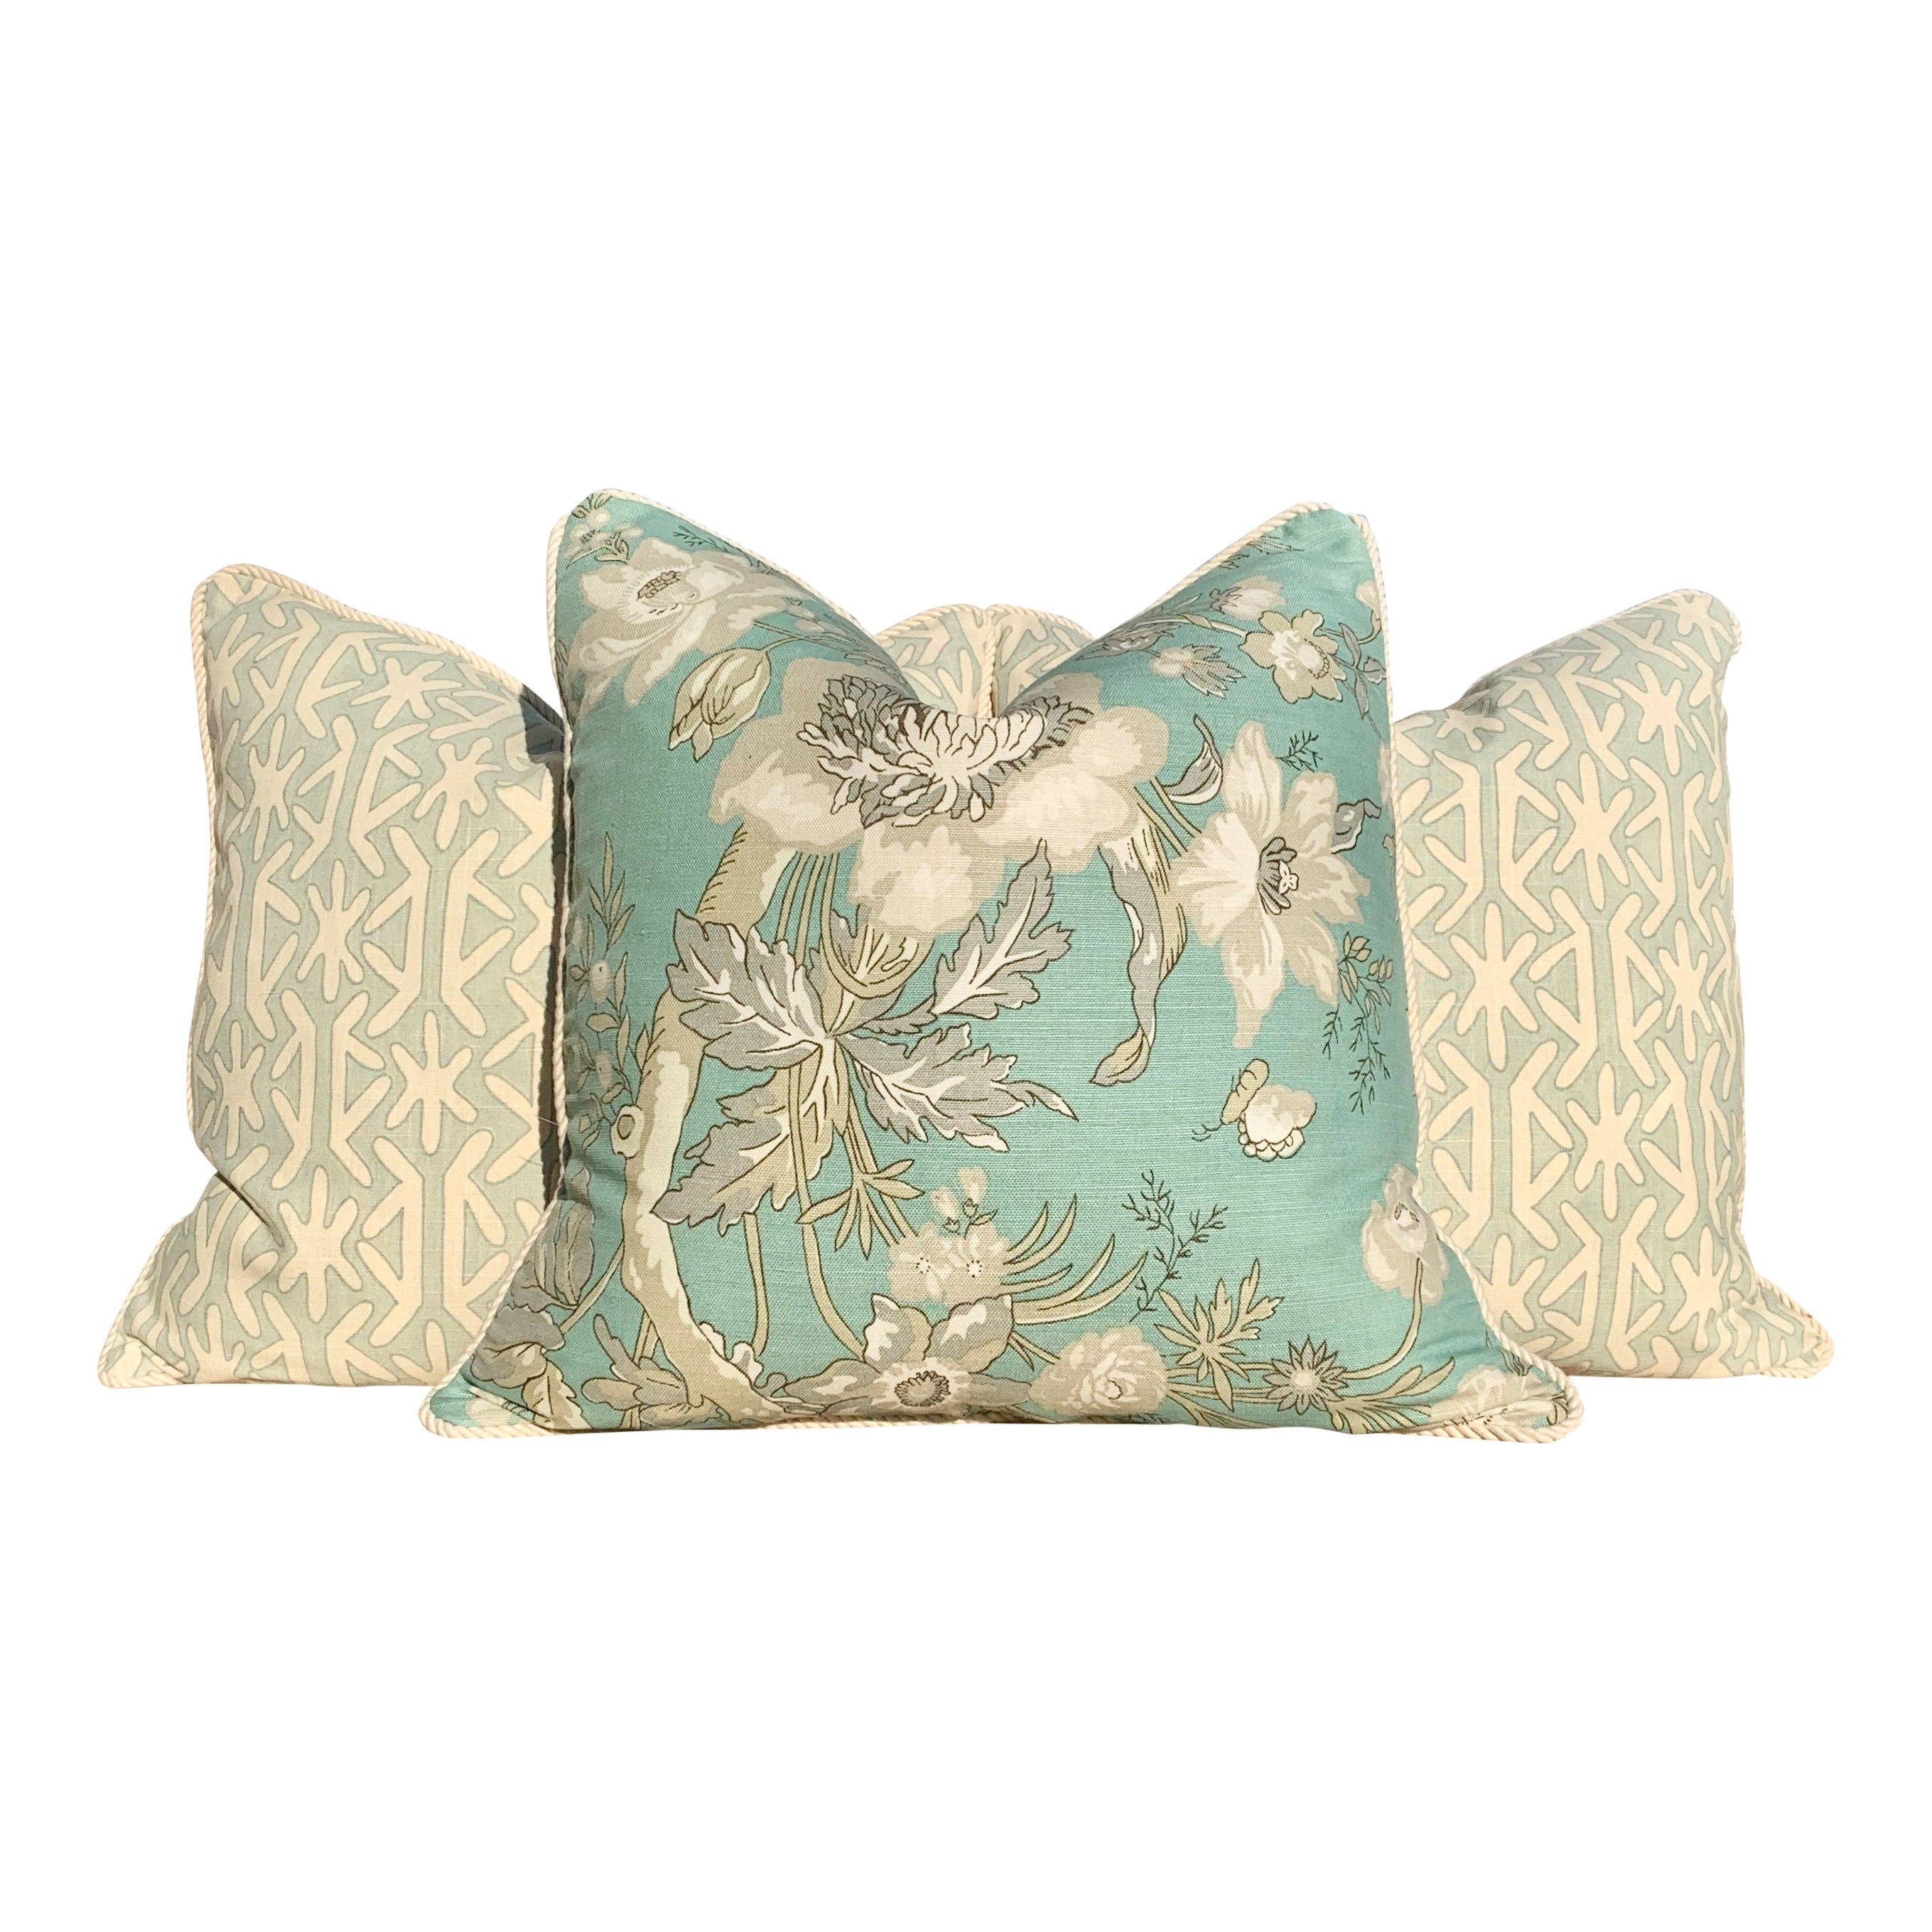 Thibaut Nemour Floral Pillow In Aqua Green Embellished with Cotton Rope Trim . Lumbar Floral Pillow.